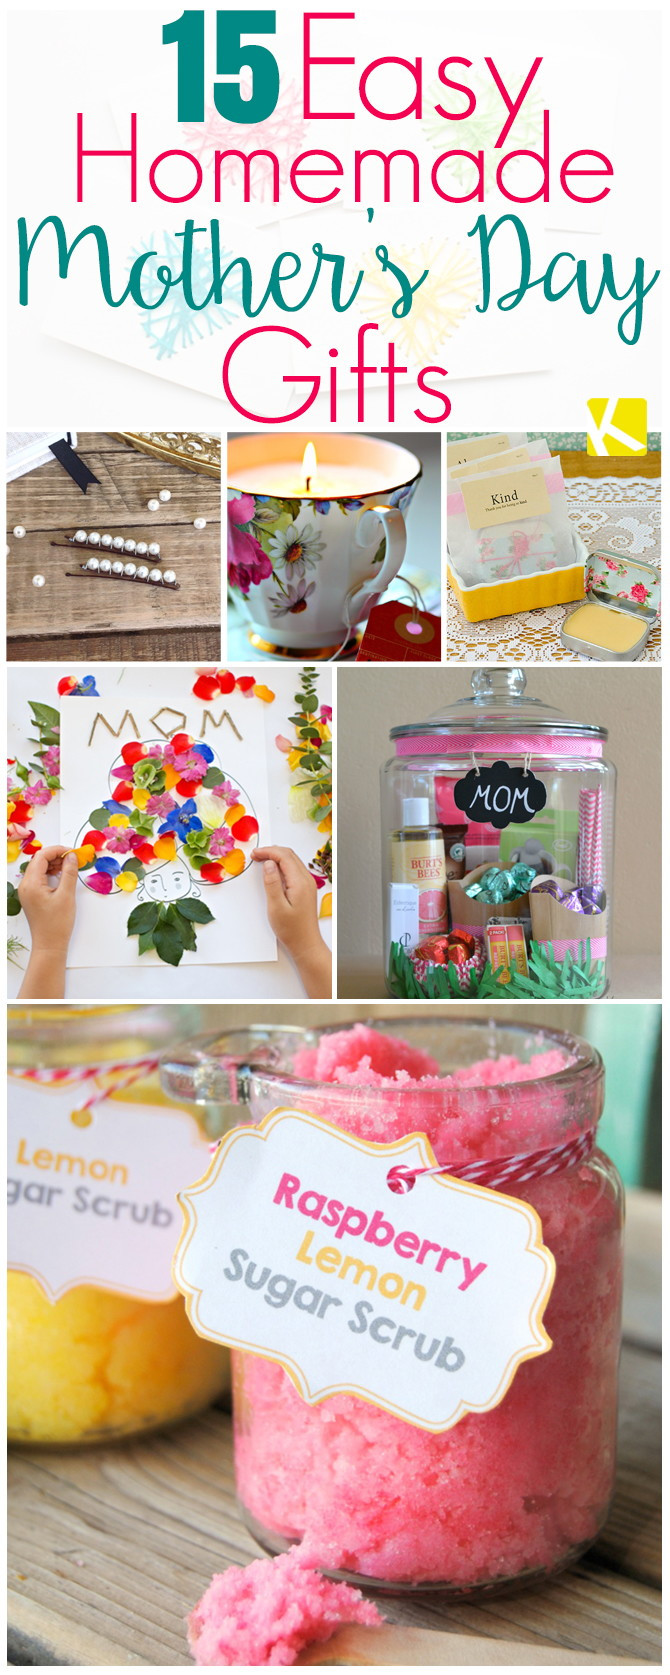 Best Homemade Mothers Day Gifts
 15 Mother’s Day Gifts That Are Ridiculously Easy to Make